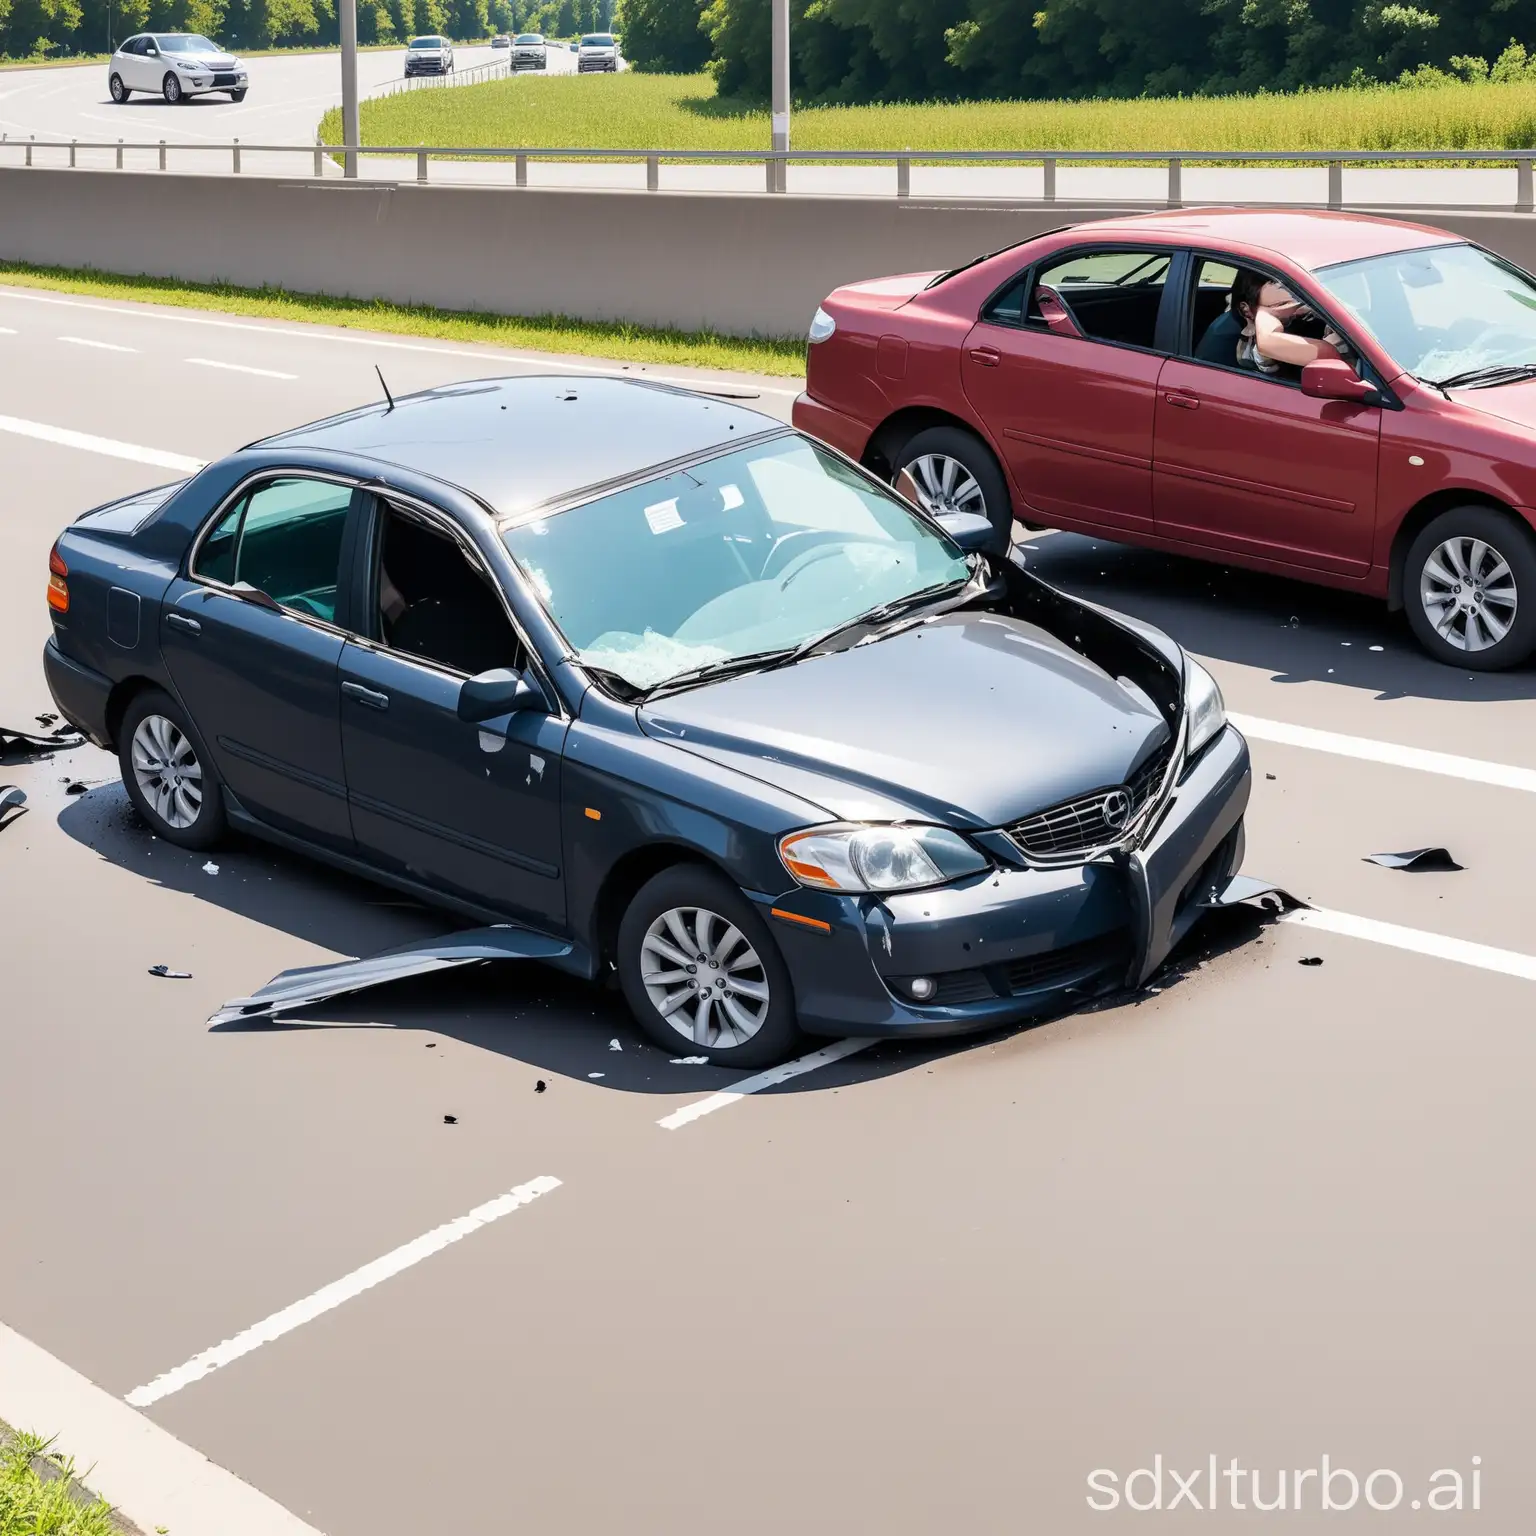 Emergency-Response-Team-at-Scene-of-Car-Accident